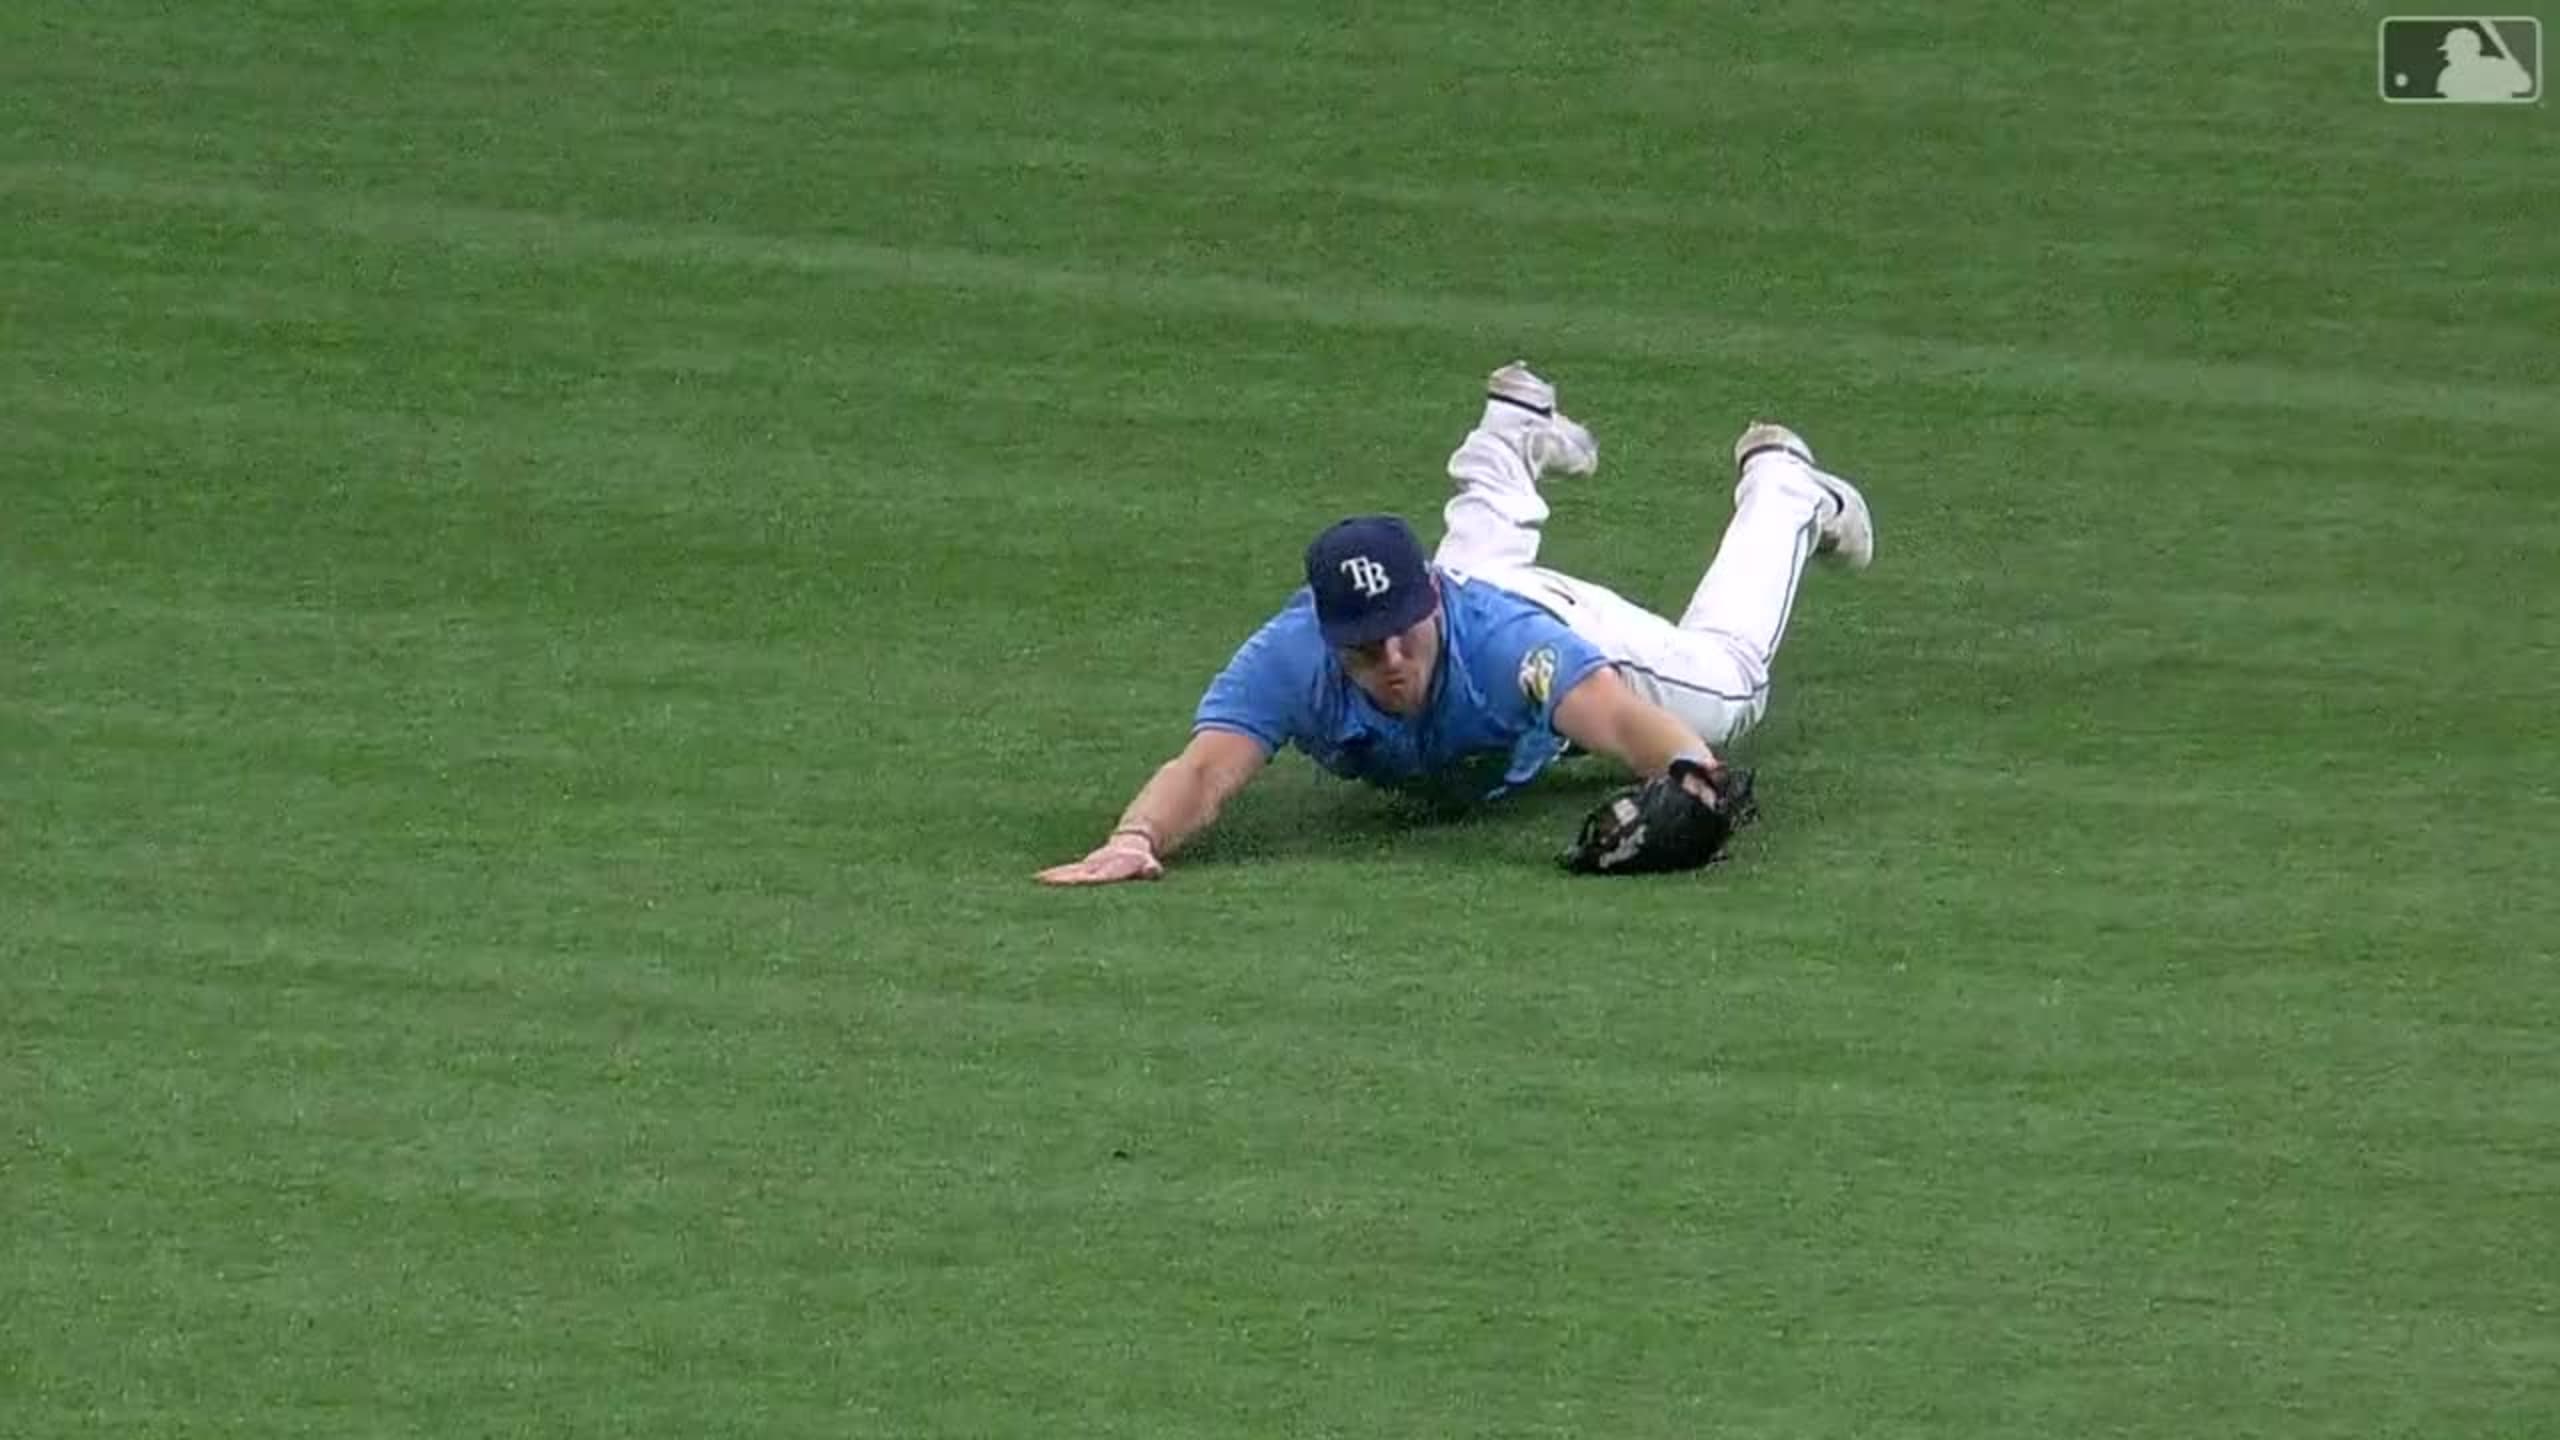 5 Best MLB Plays Of The Day: Aaron Judge Flashes Leather On Diving Catch